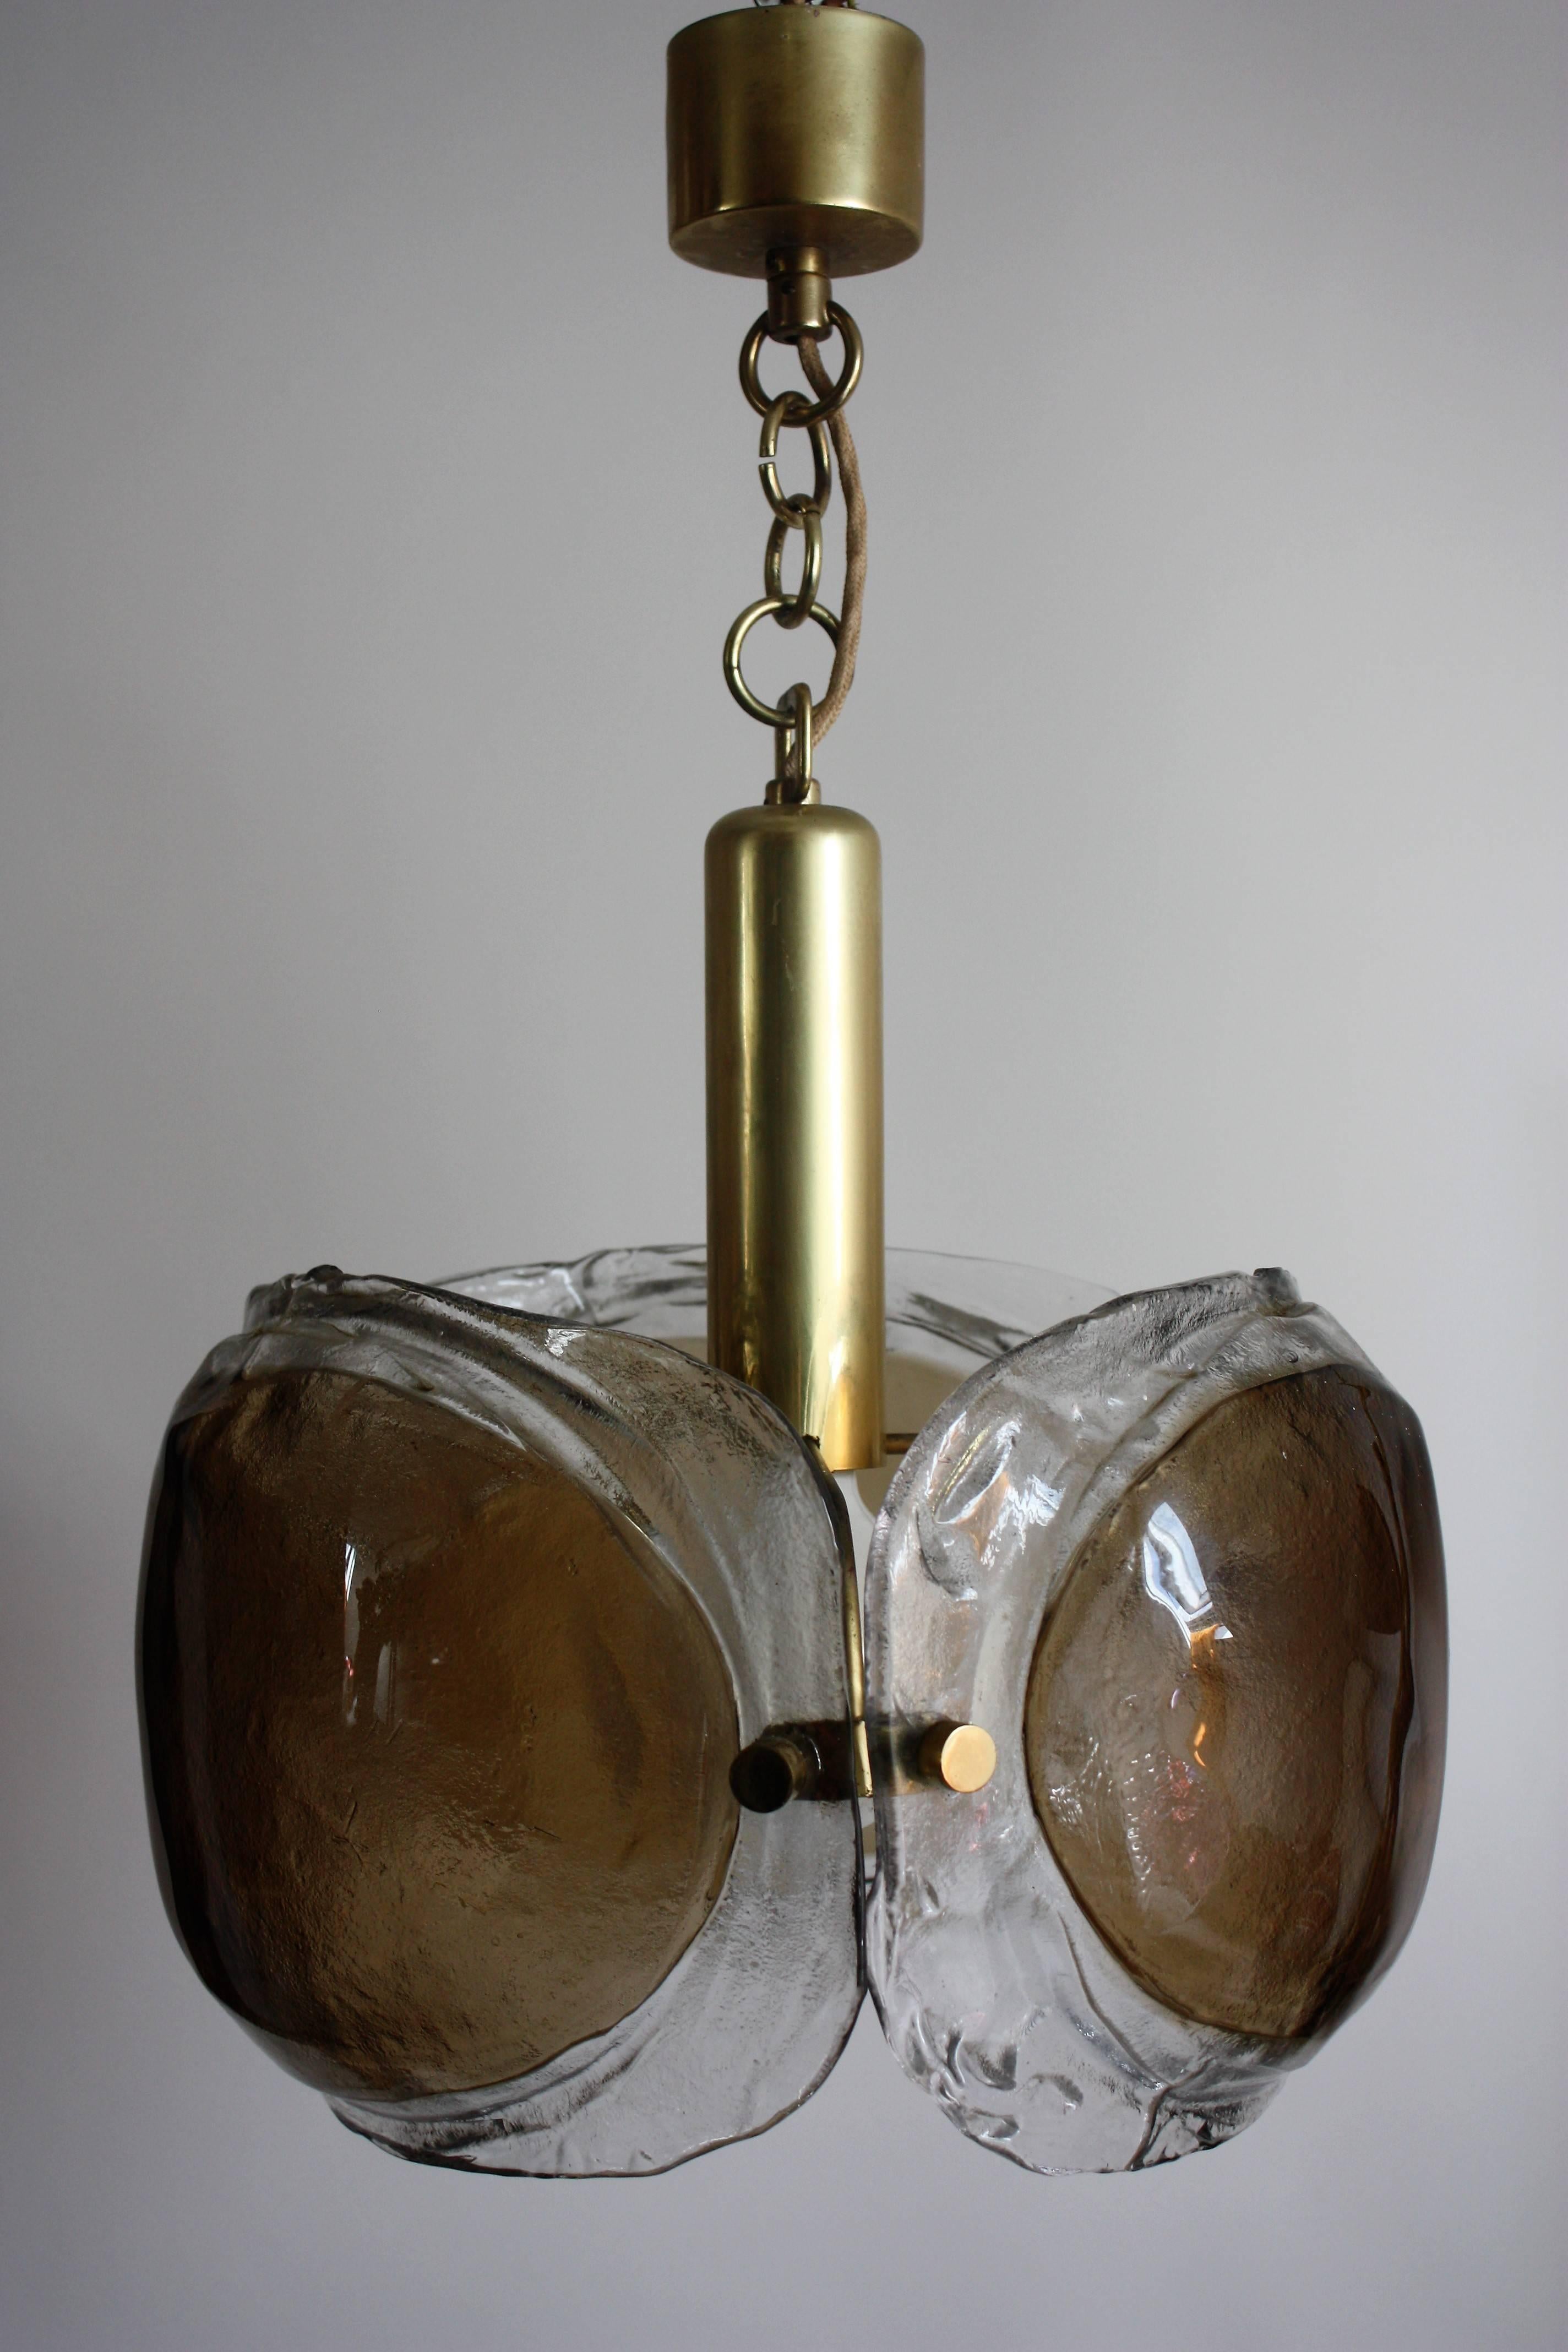 Unusually Mid-Century Modern one light glass chandelier by KAISER, Germany, circa 1960s.
Brass frame and thick textured glass.
Very good condition.
Sockets: 1 x e27  for standard screw bulbs